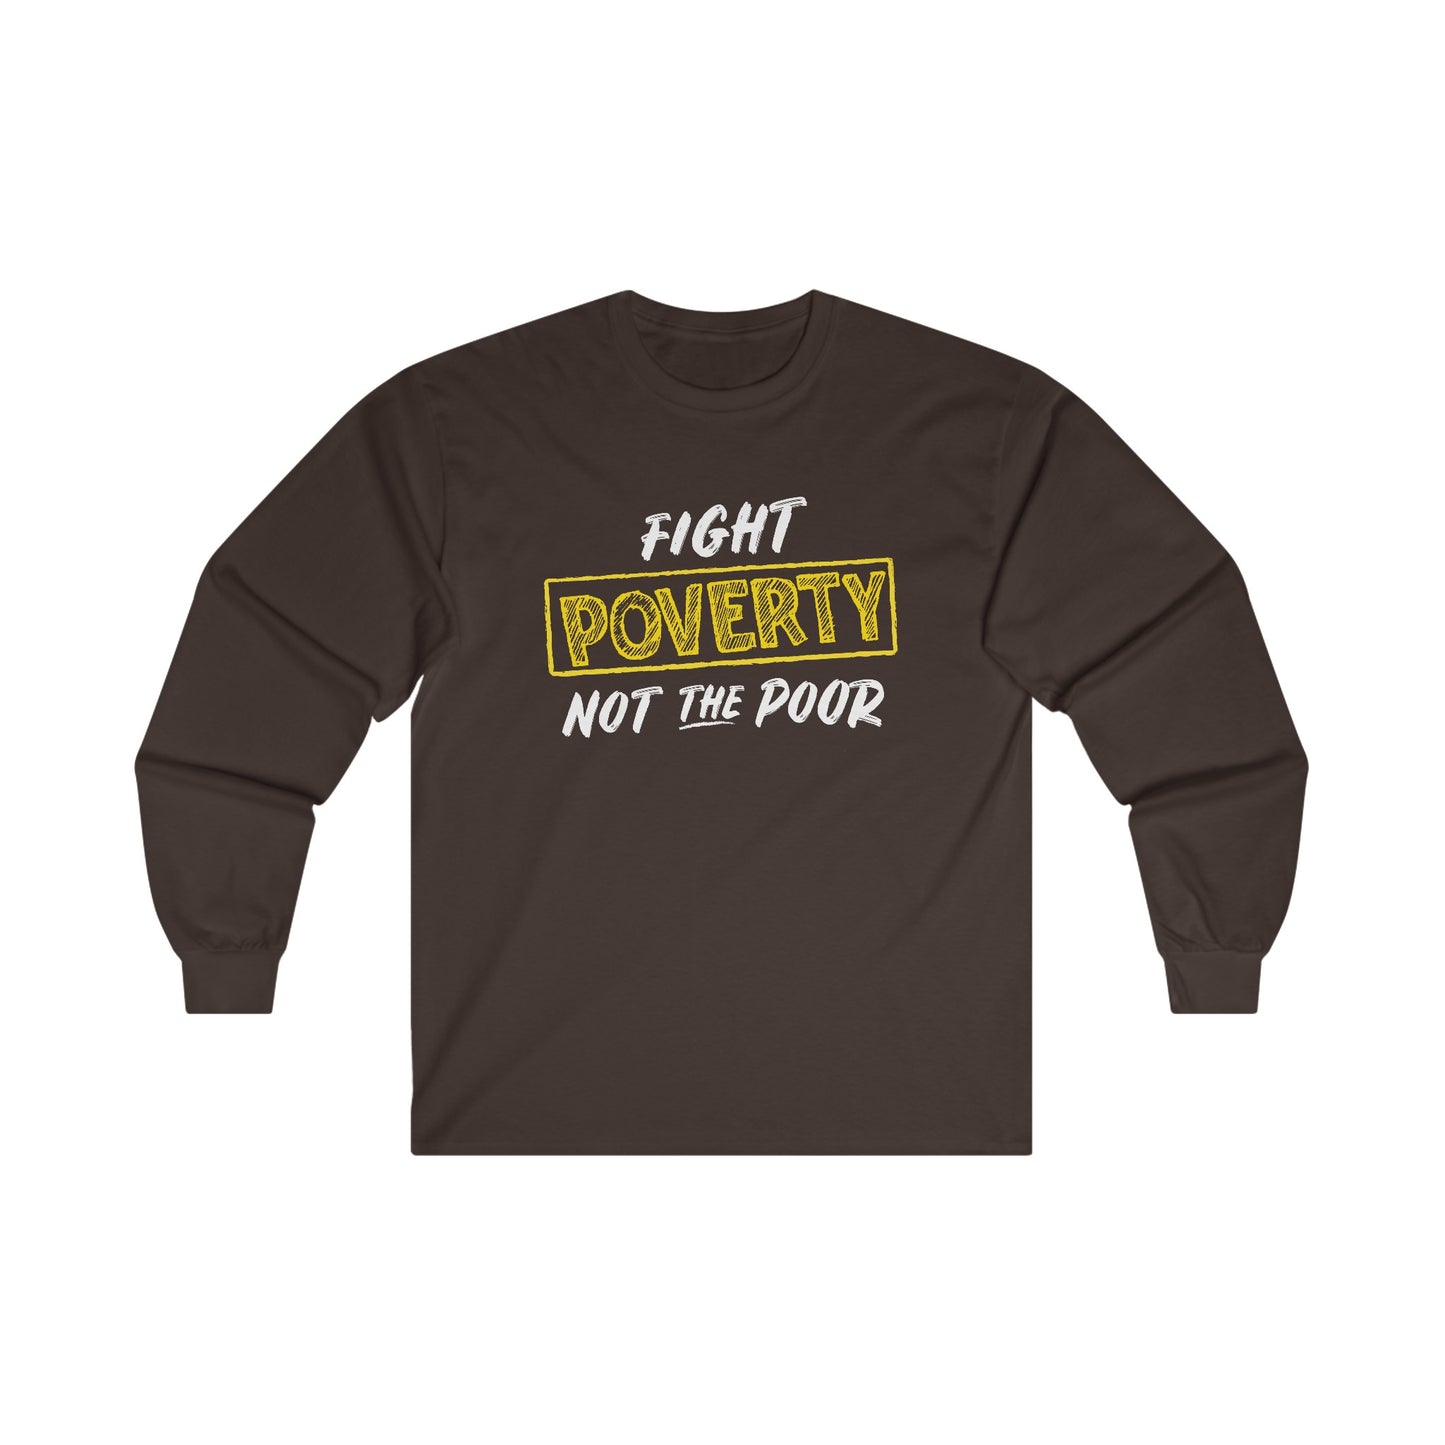 “Fight Poverty Not The Poor” Unisex Long Sleeve T-Shirt